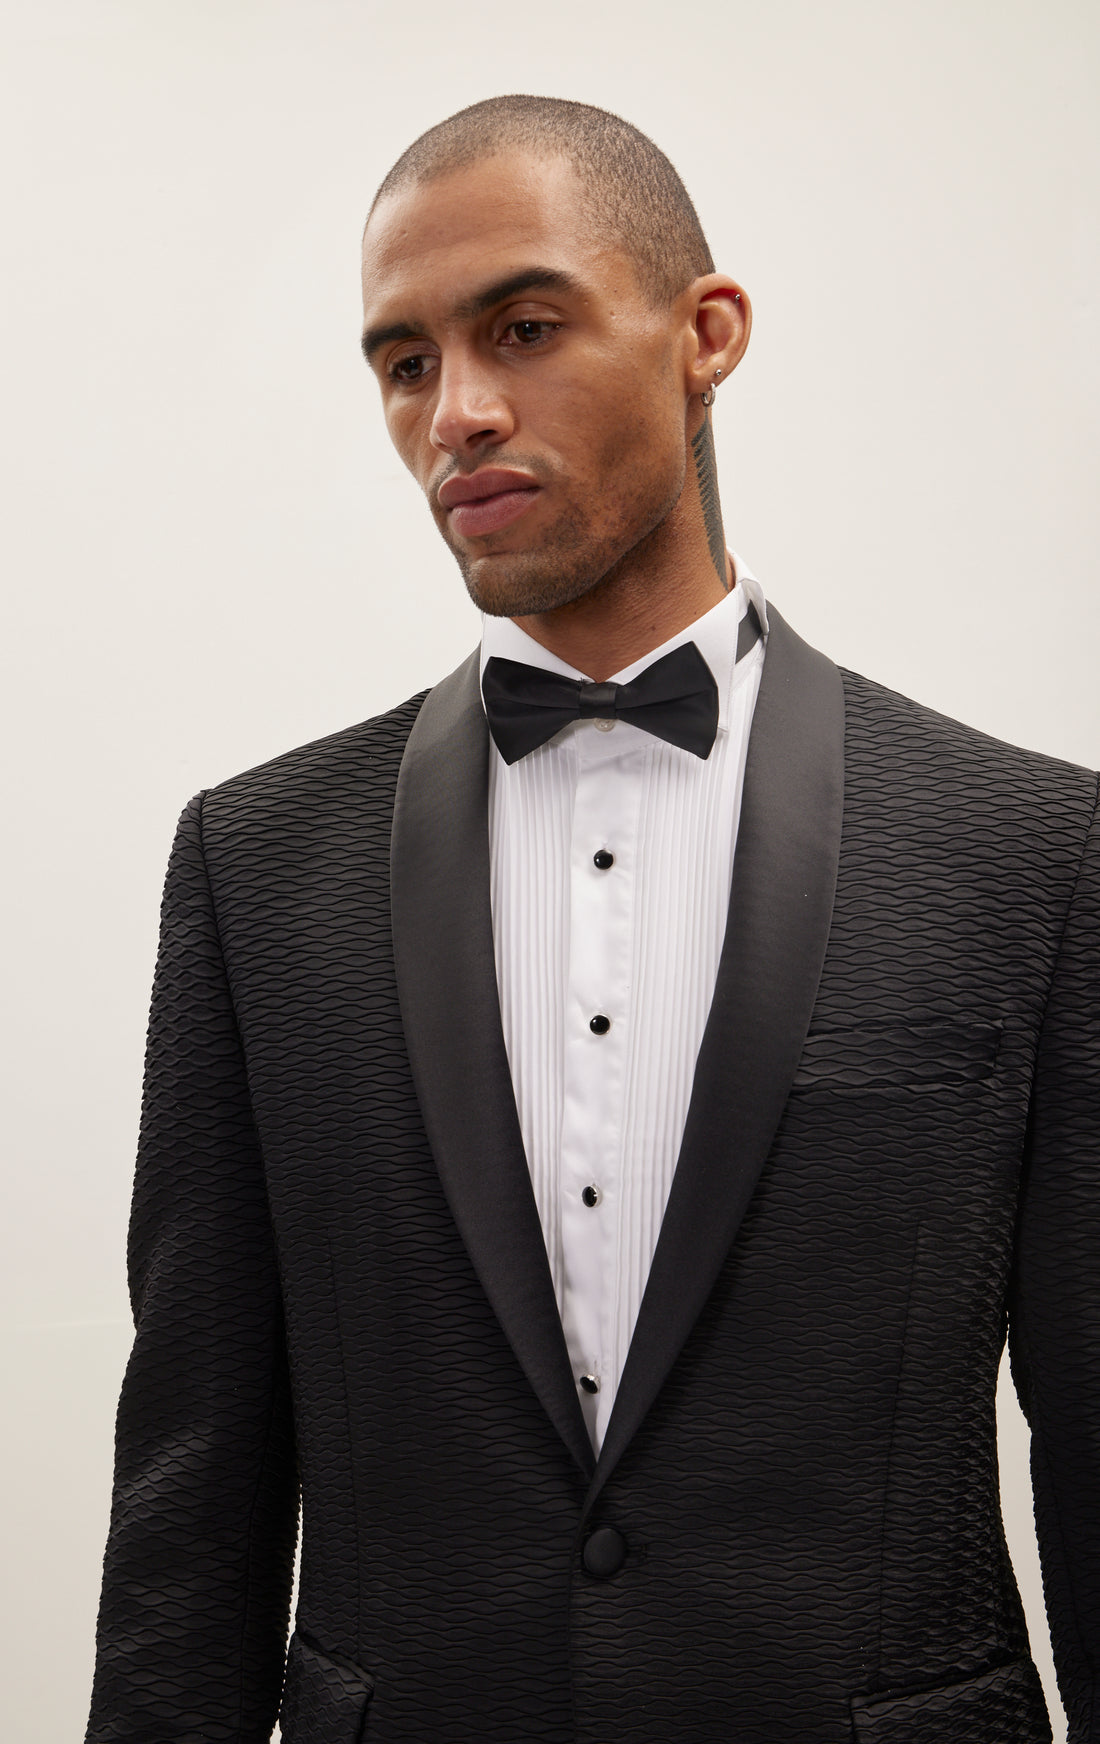 All Over Quilted Shawl Lapel Tuxedo Jacket - Black